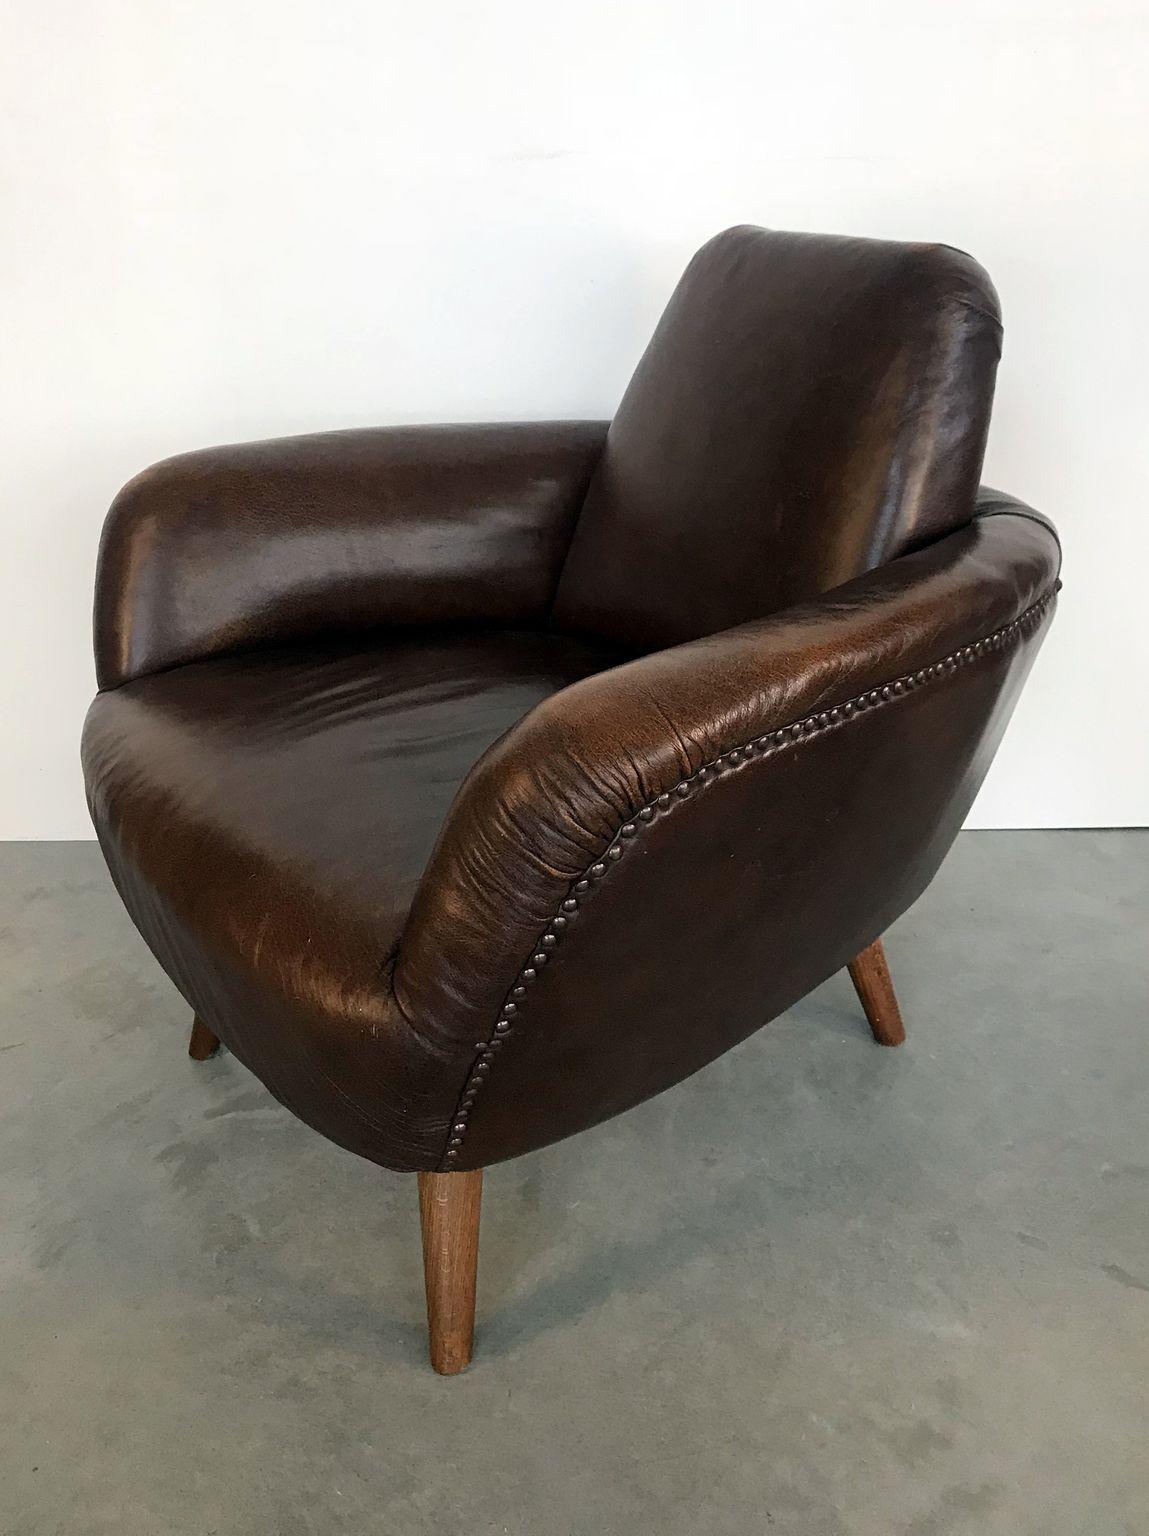 Armchair on beechwood legs with riveted leather seating from former Yugoslavia.